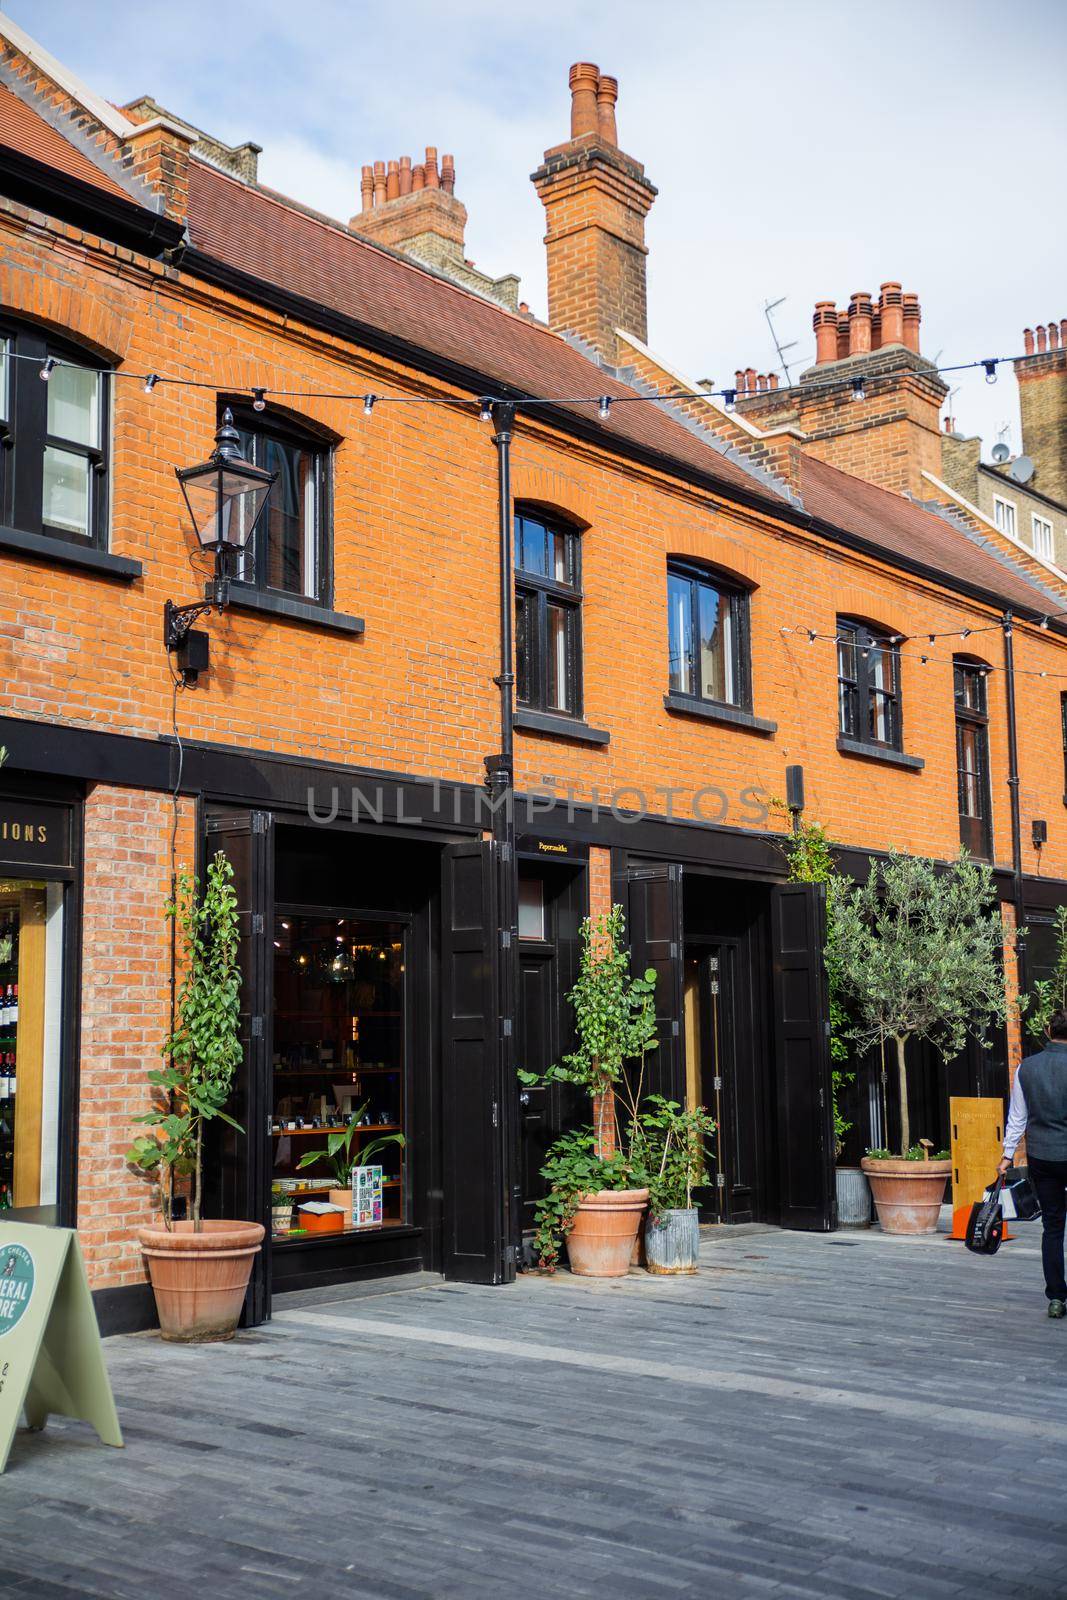 London, UK - February 14, 2020: Row of brick buildings with restaurants in Pavilion Road. Beautiful British brick buildings with classic architecture. Colorful London neighborhood